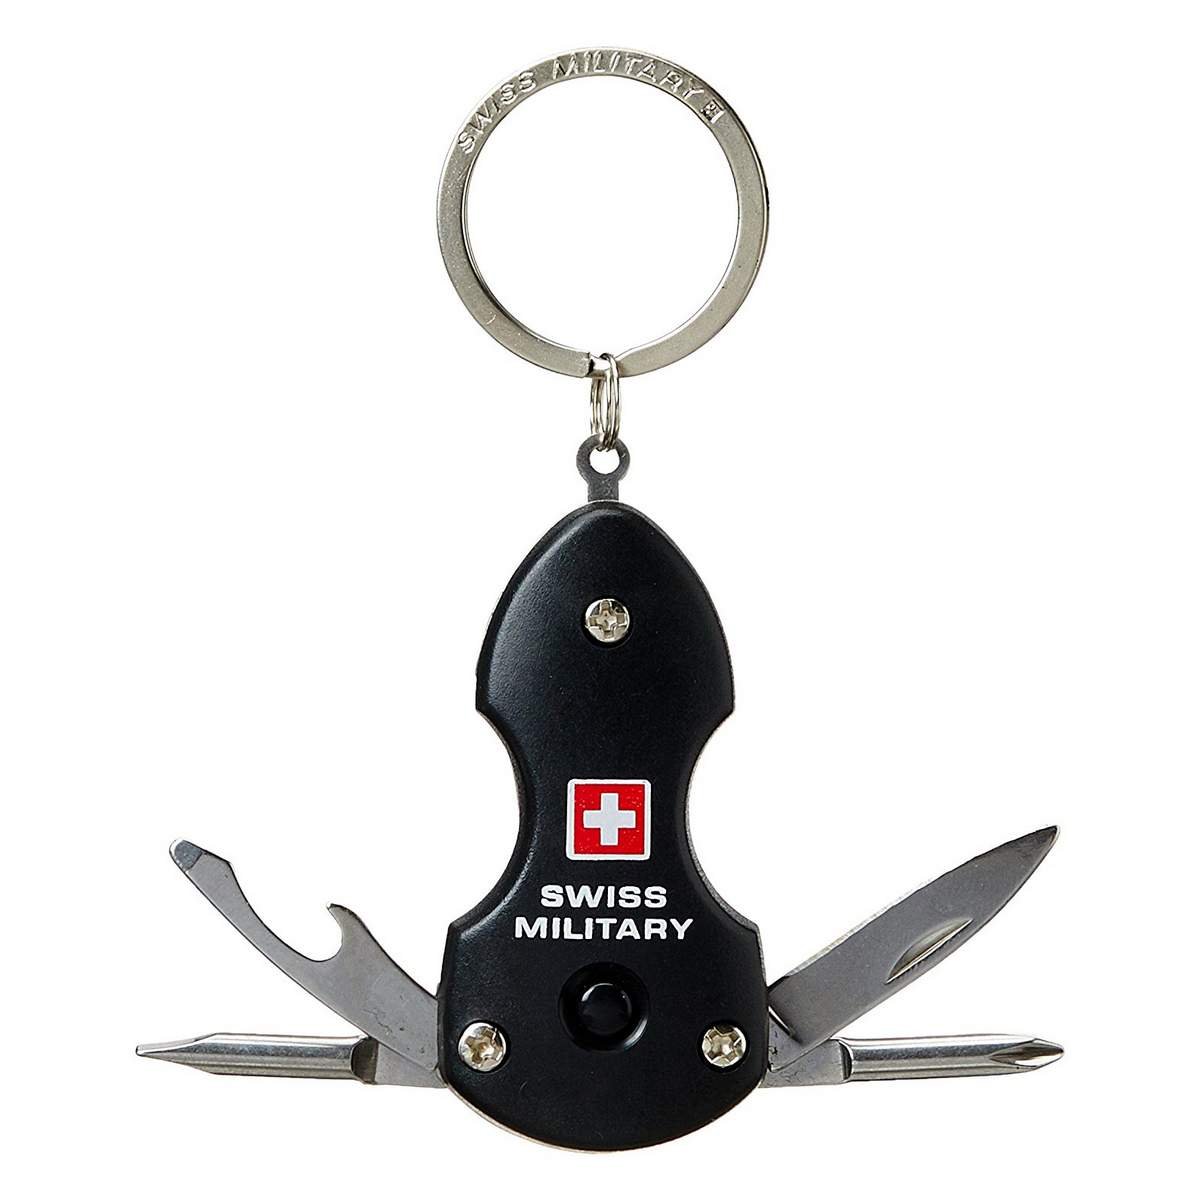 Metal Keychain Corporate Gifts Supplier in price range Rs 51-100 in Pune,  India | Customized Corporate Gifts Supplier & Manufacturer